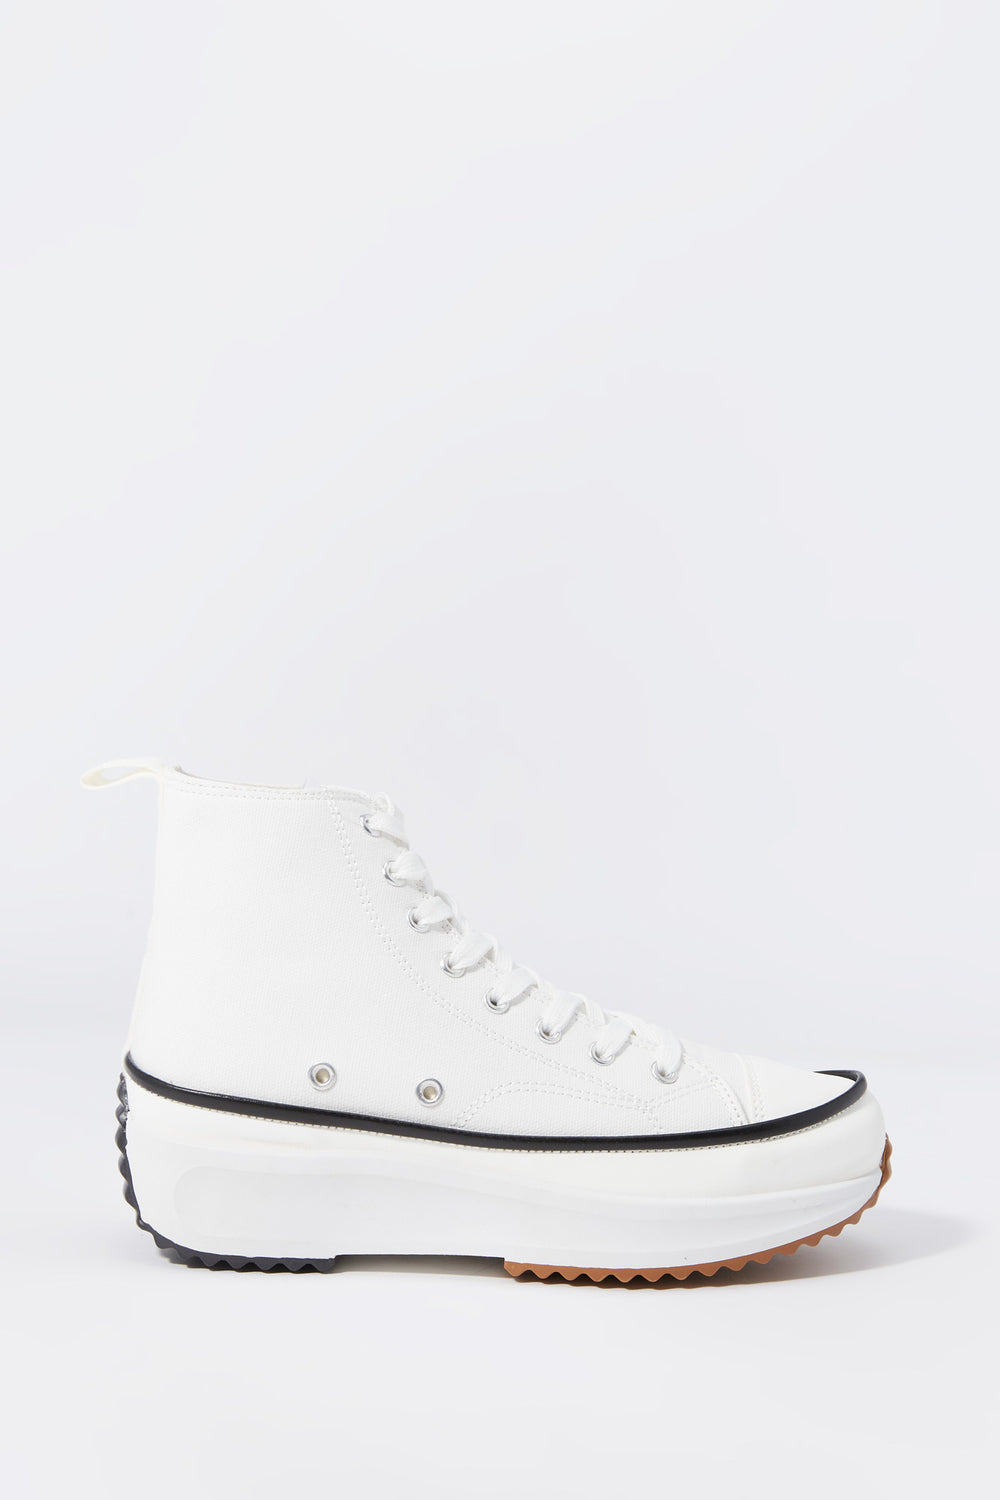 Spiked Sole Lace-Up High Top Sneaker Spiked Sole Lace-Up High Top Sneaker 6